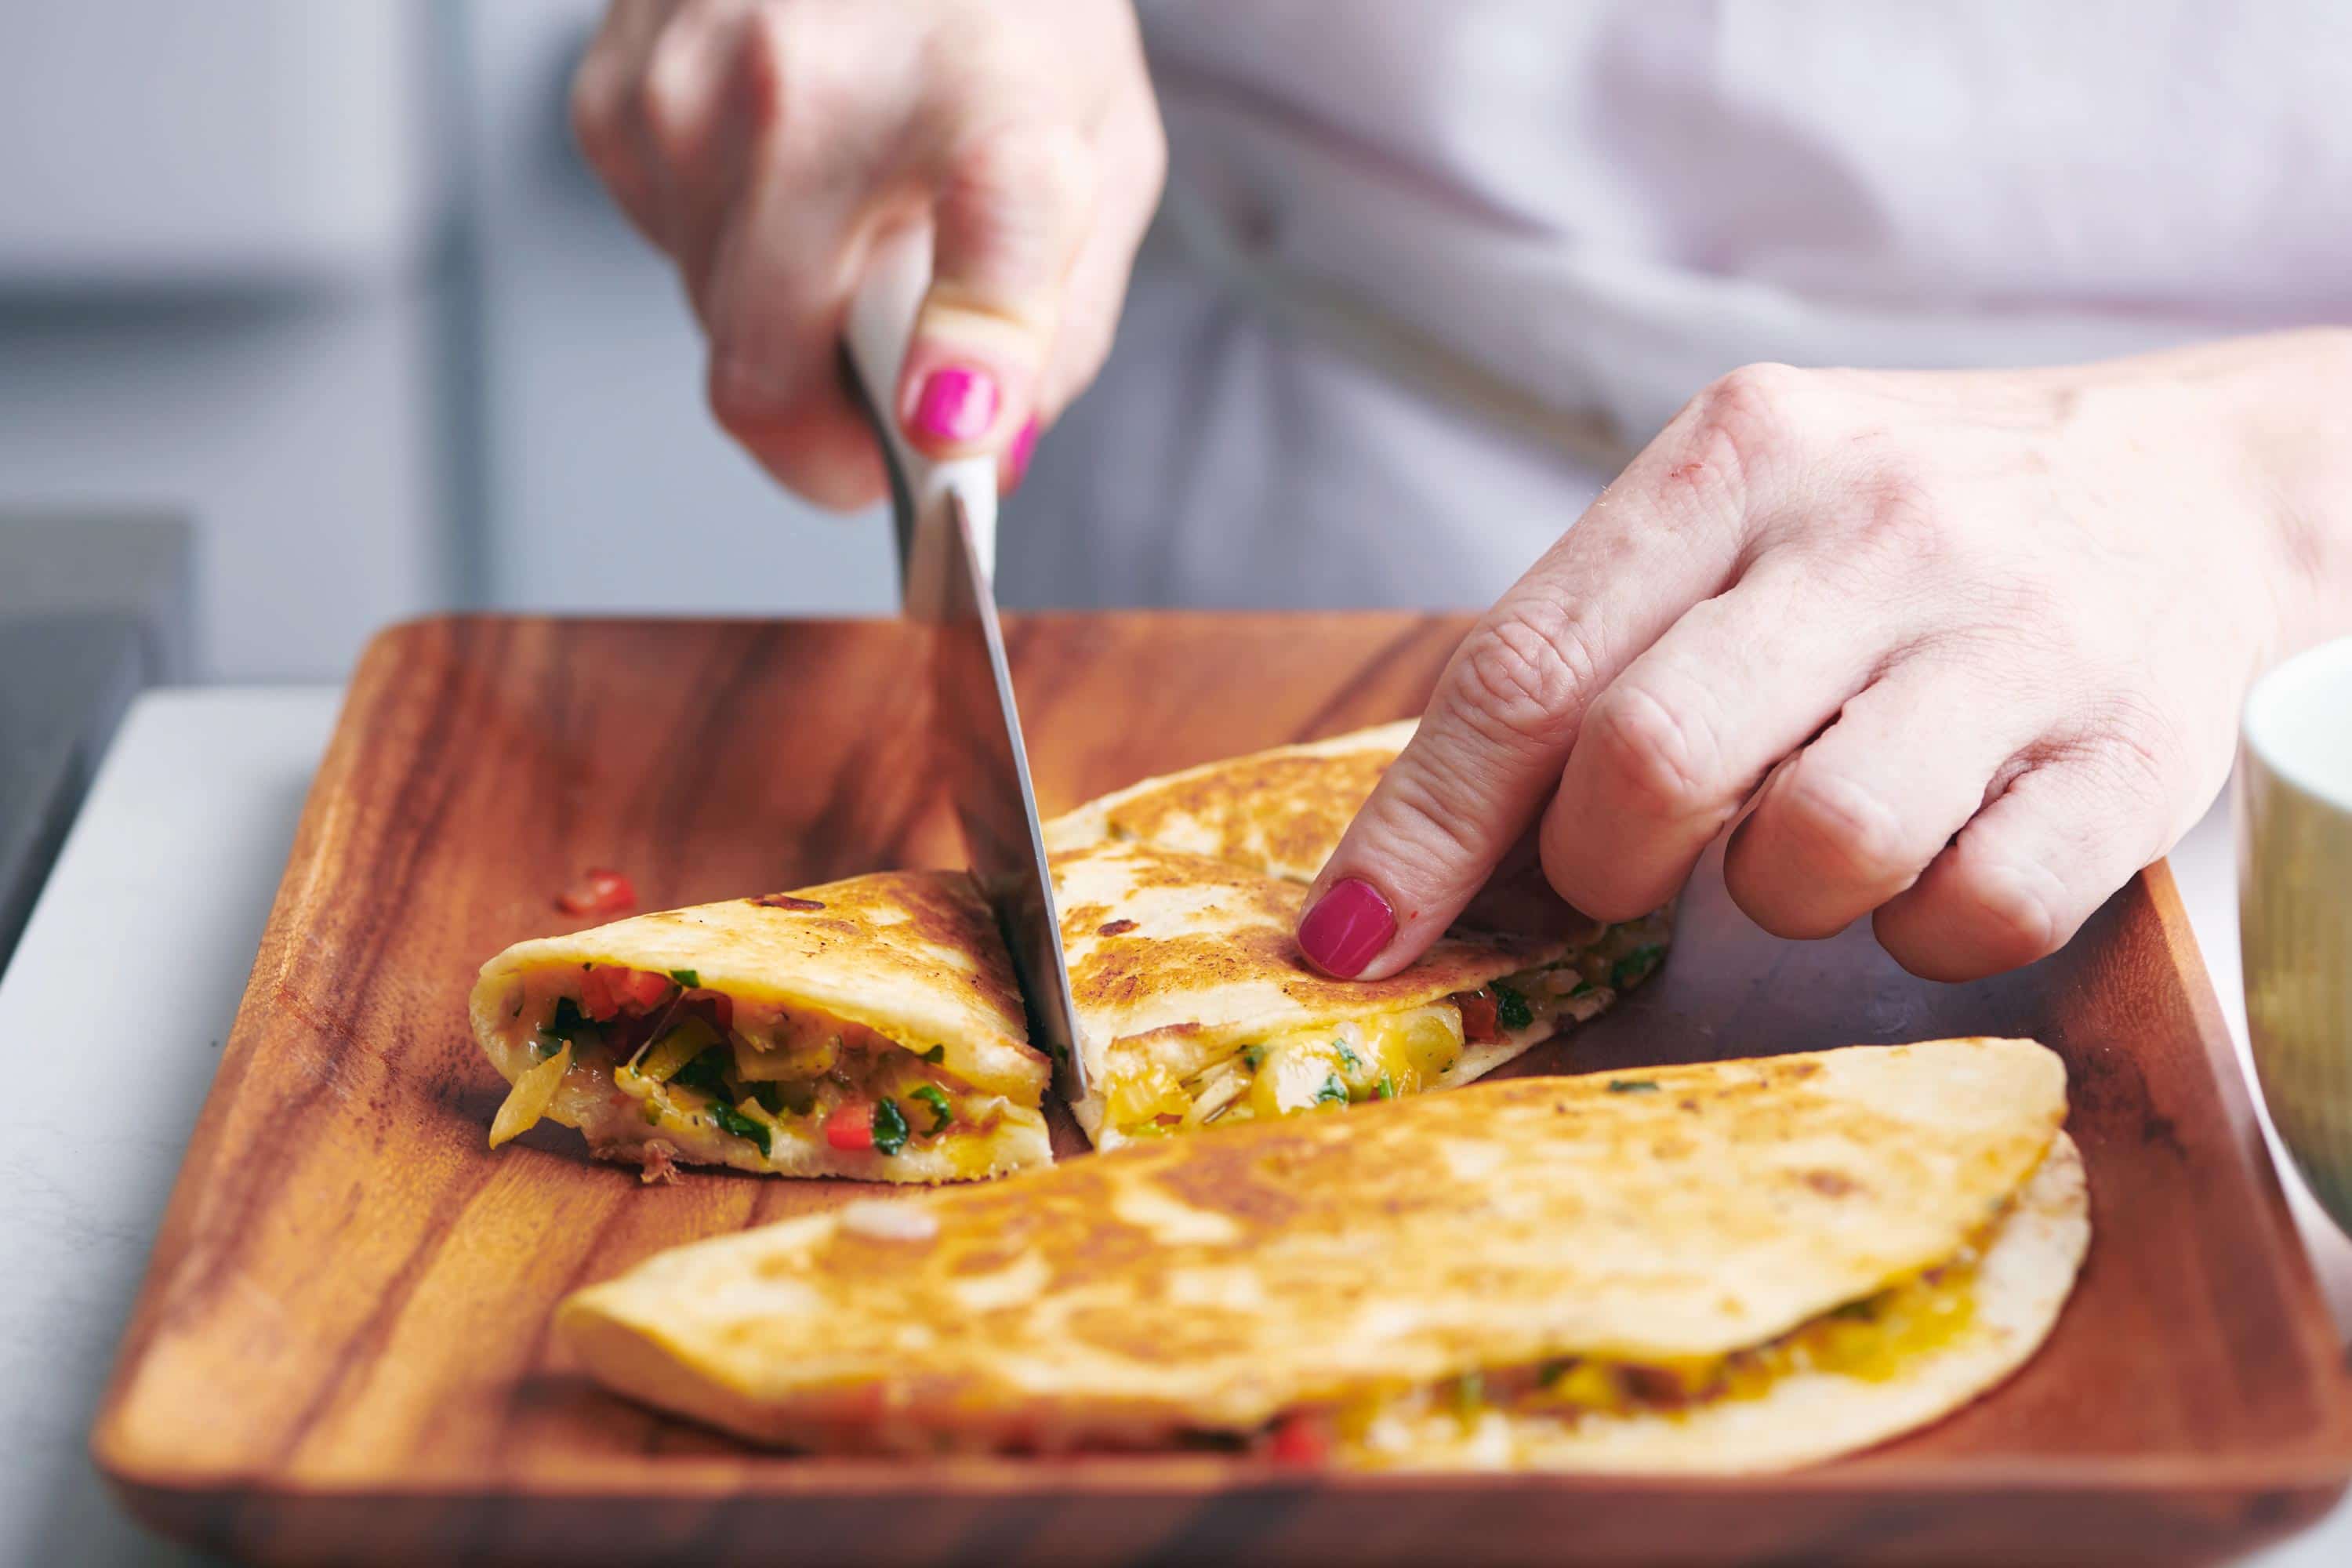 Woman slicing a Vegetable Quesadilla on a wooden board.